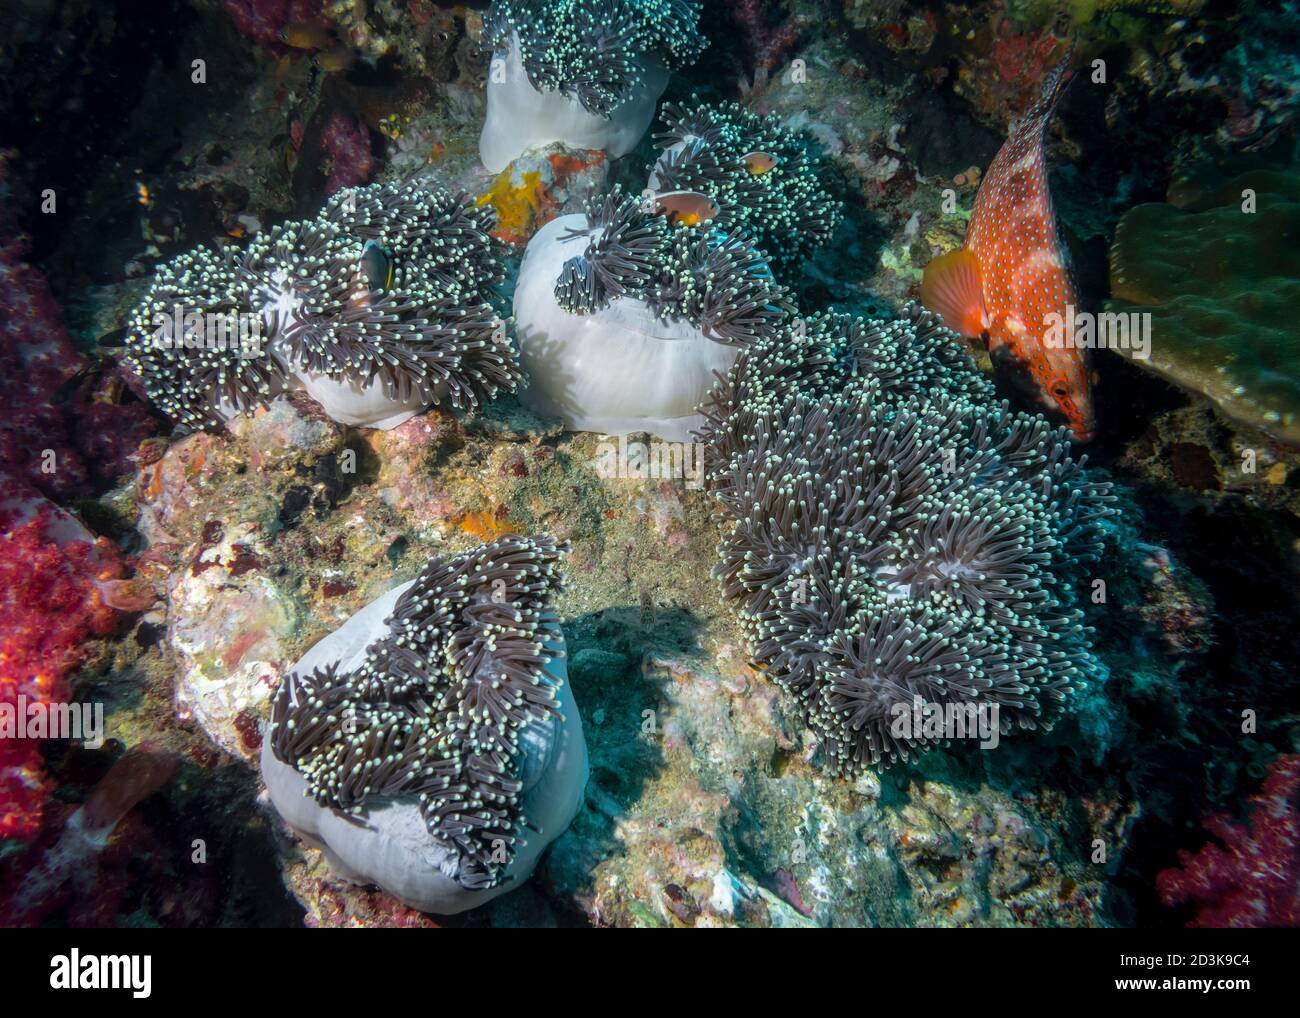 Actinia and fish inhabiting it on a coral reef in the Indian ocean Stock Photo